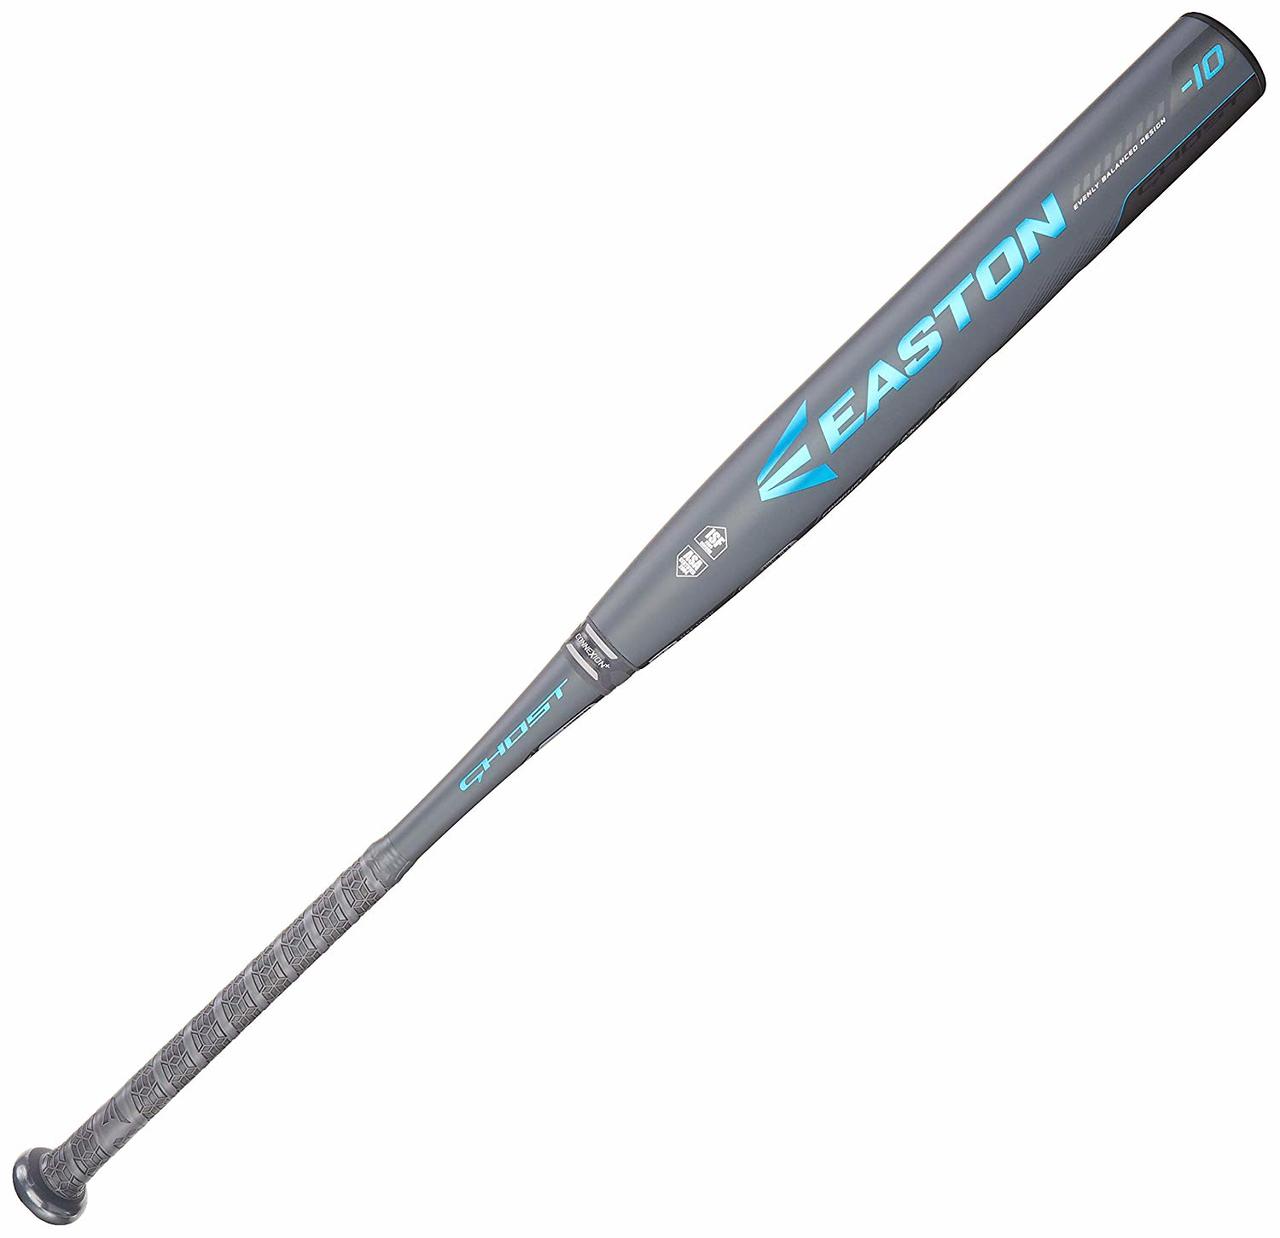 easton-ghost-asa-fastpitch-softball-bat-32-in-22-oz-fp18gh10 FP18GH10-3222 Easton 628412172544 Lowest barrel compression in the game best-in-class acoustics at impact Maximum